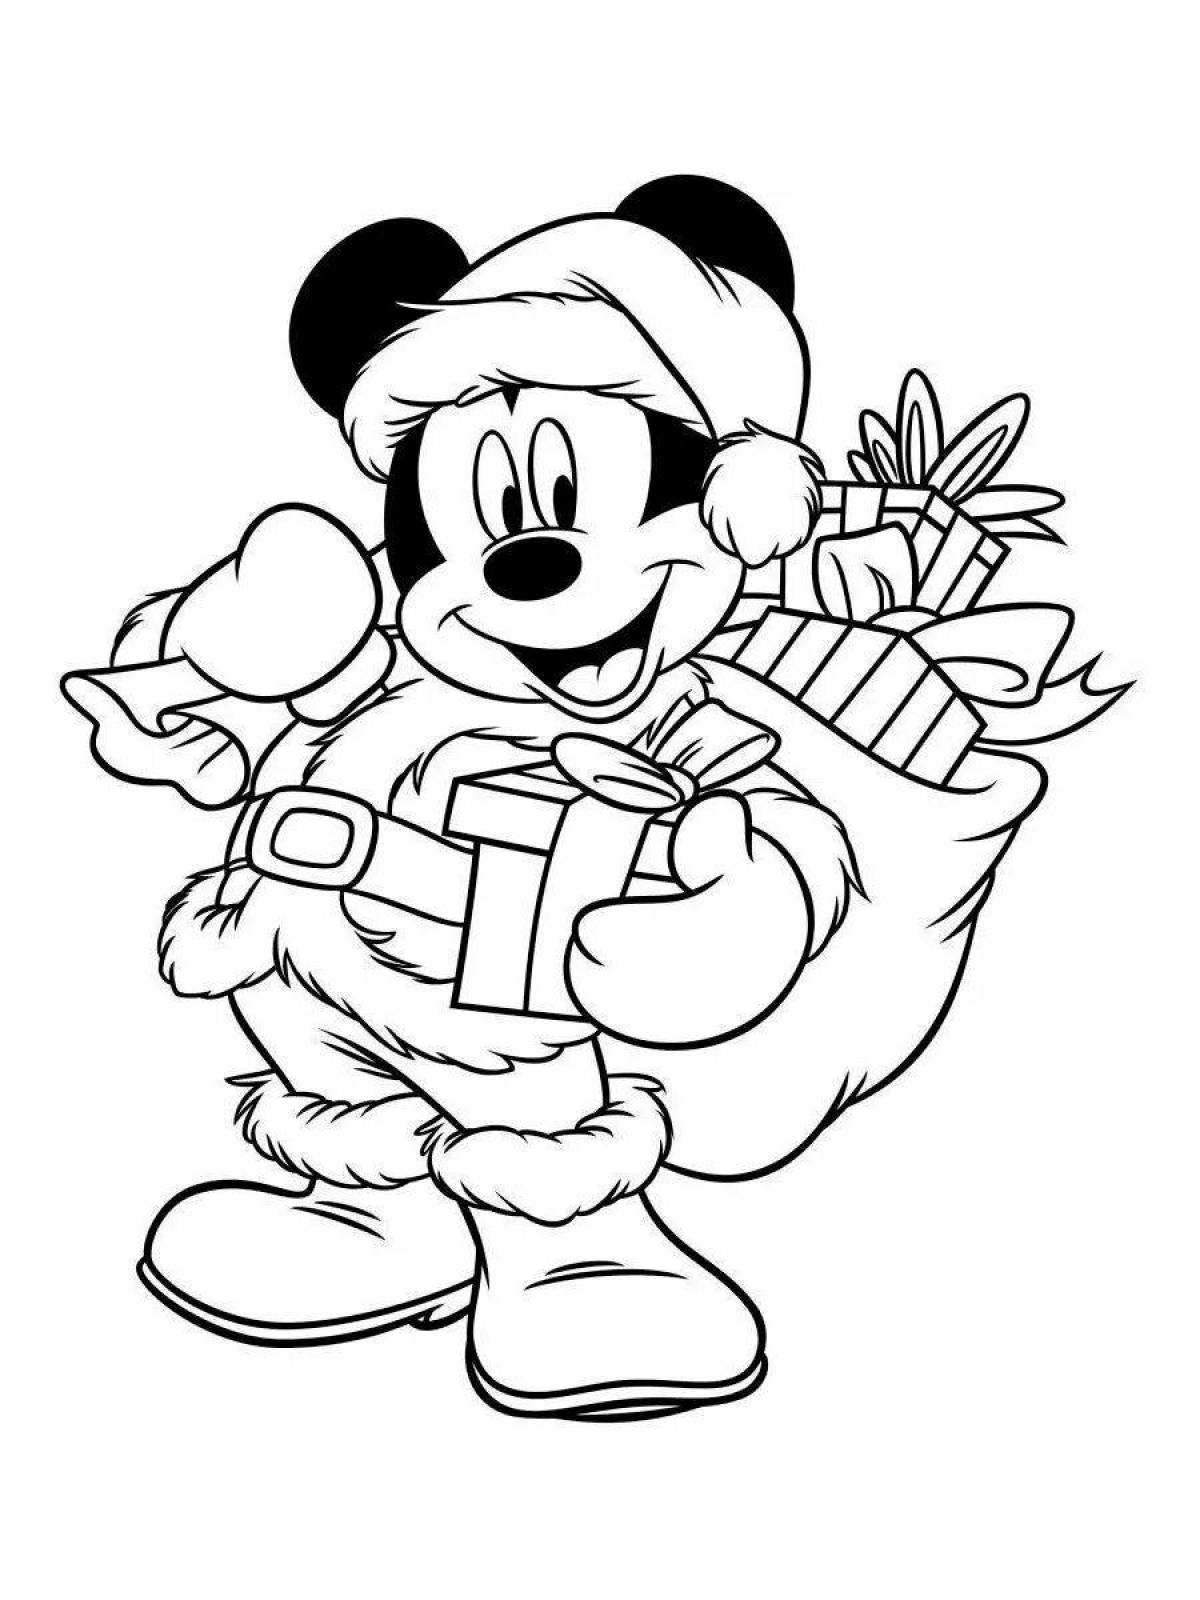 Colored Christmas characters coloring book